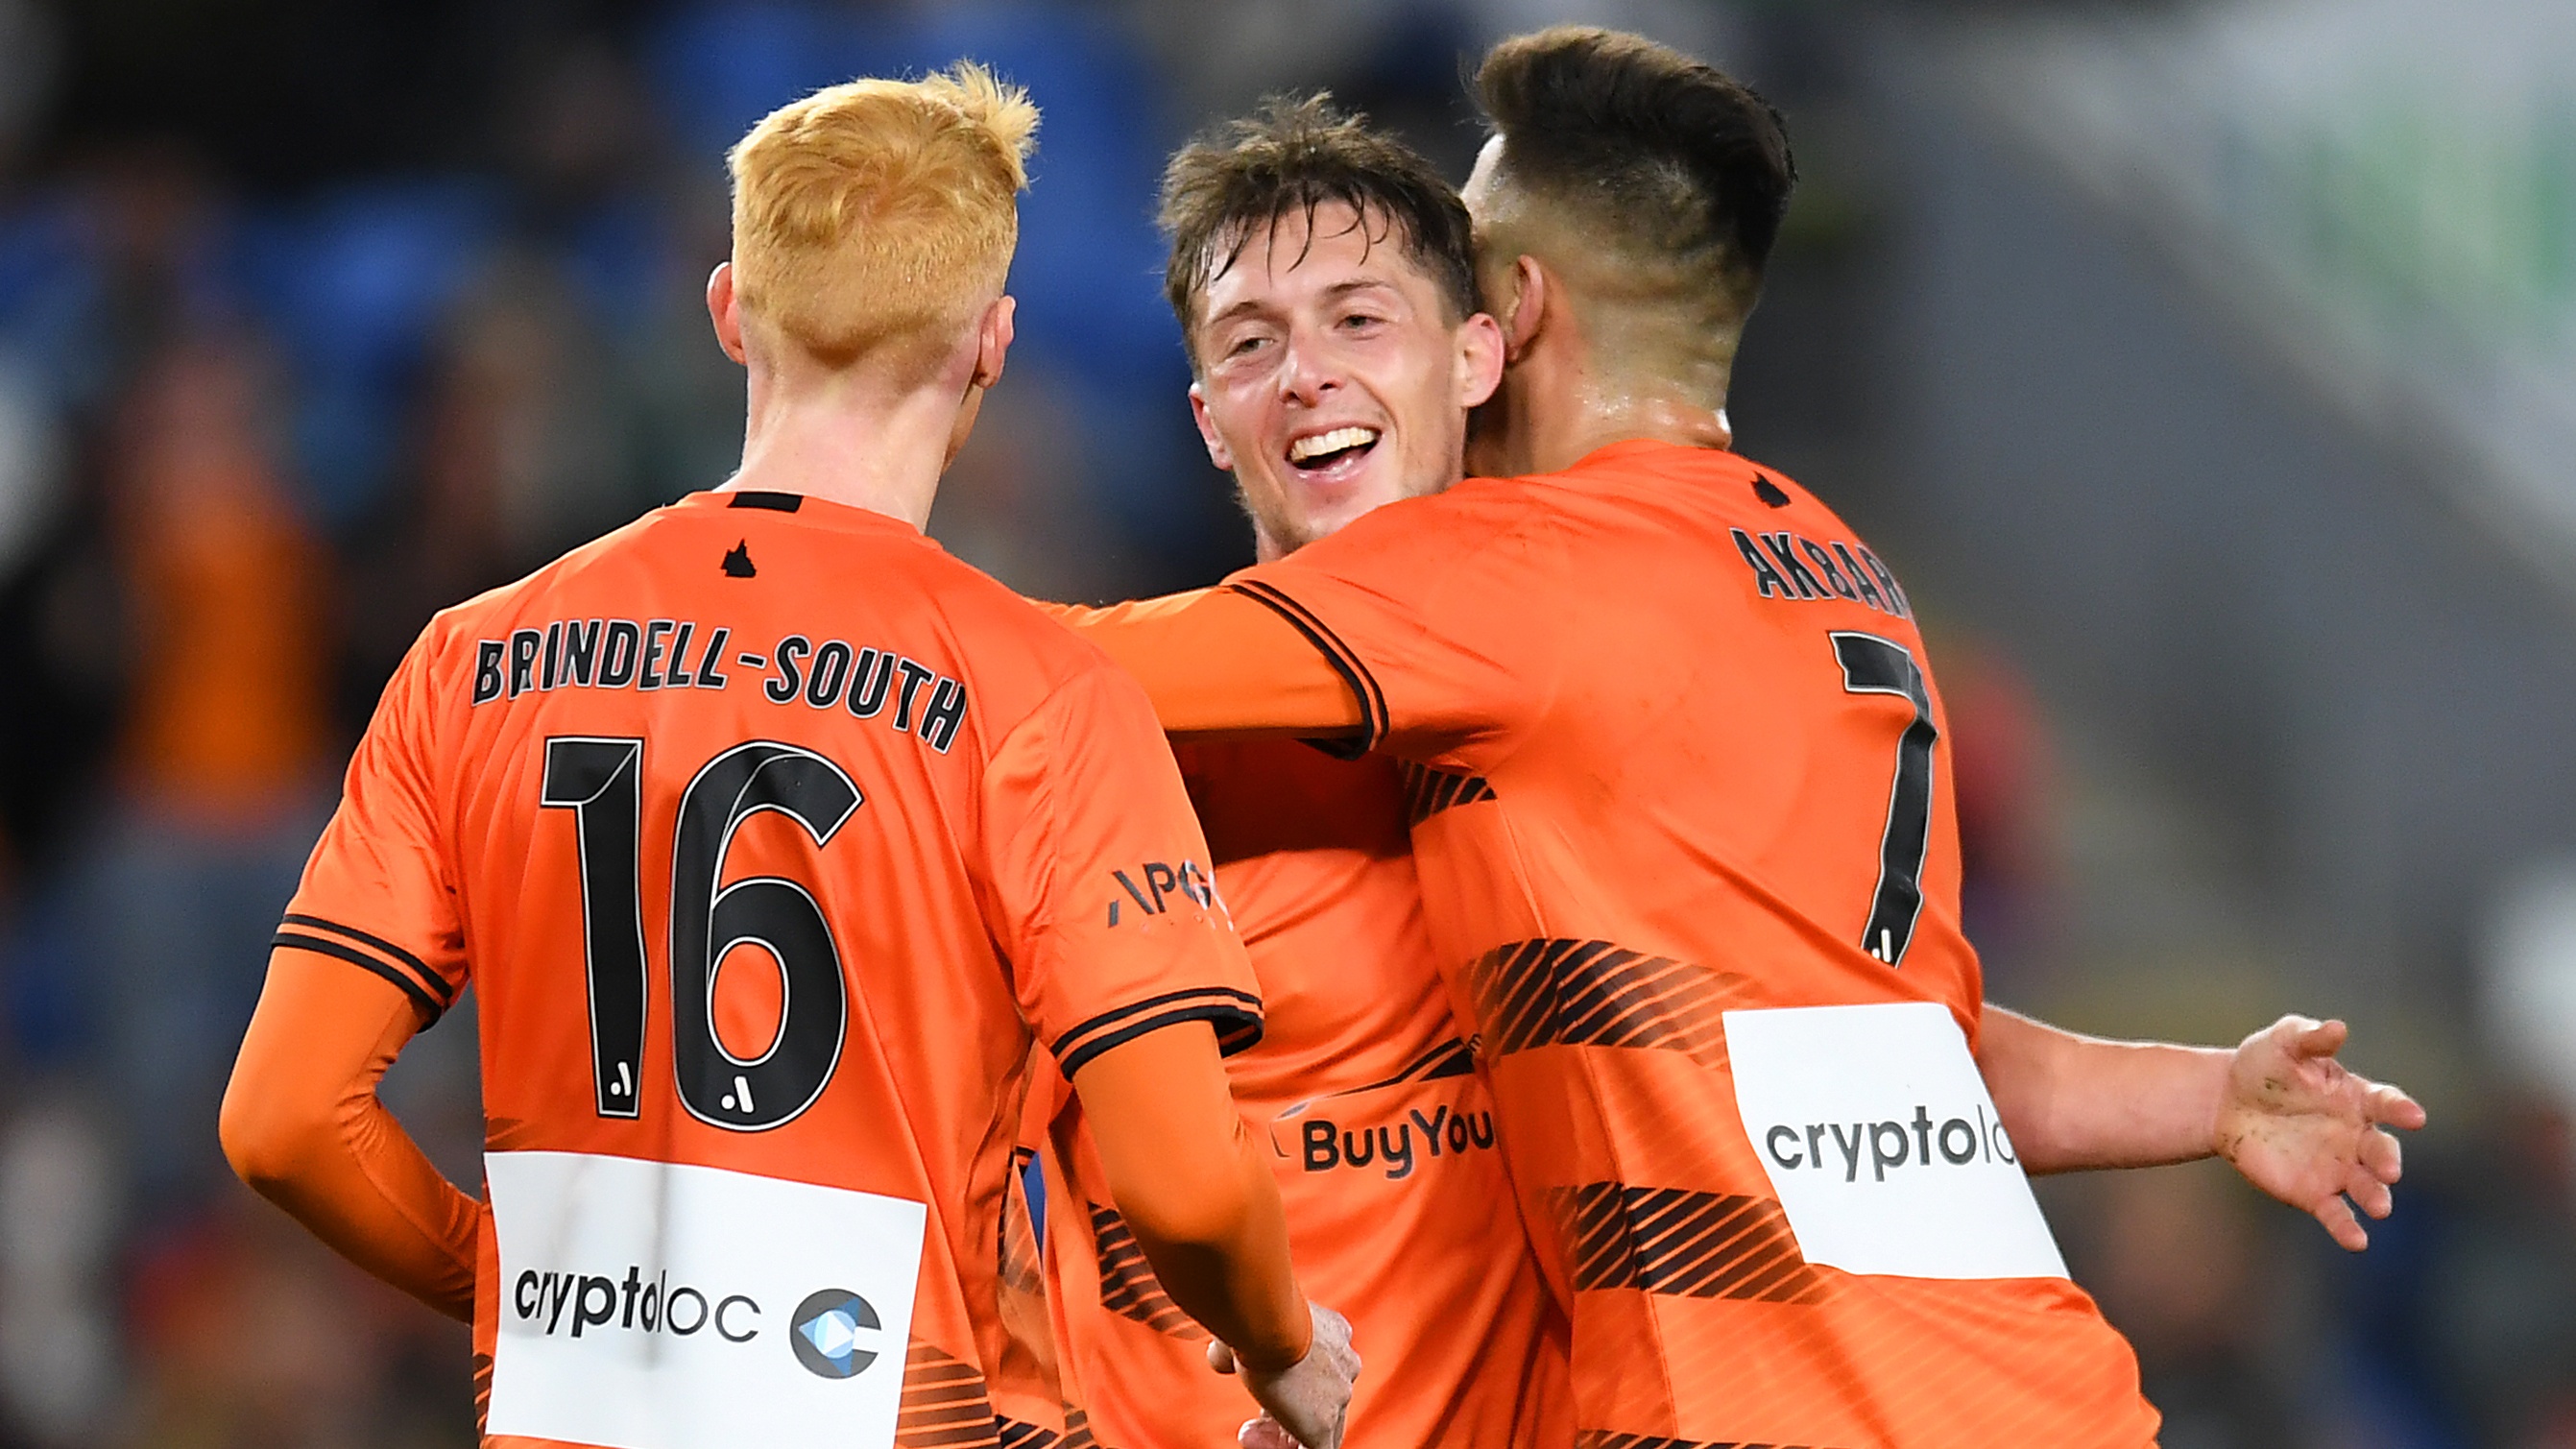 <div>Leeds United outlast A-League's Roar in Queensland Championship Cup</div>